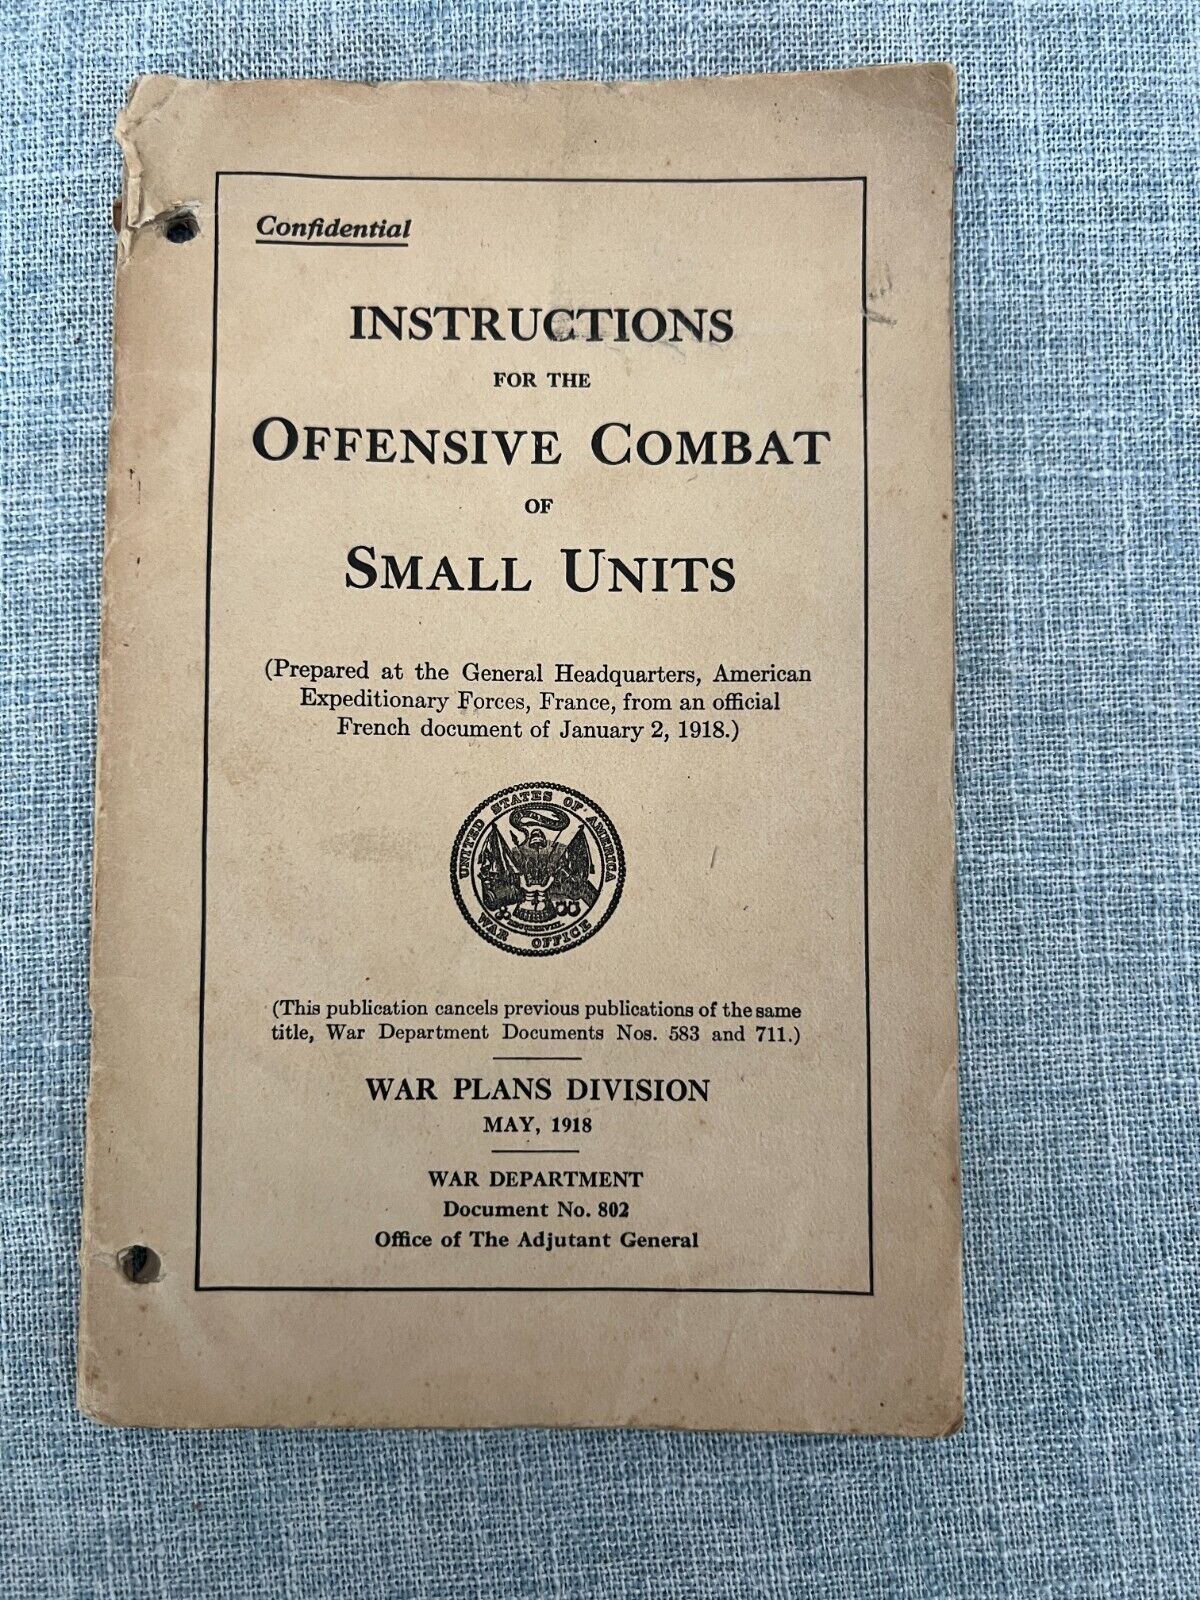 RARE WW1 Manual / Phamplet - Instruciton for the Offensive Combat of Small Units